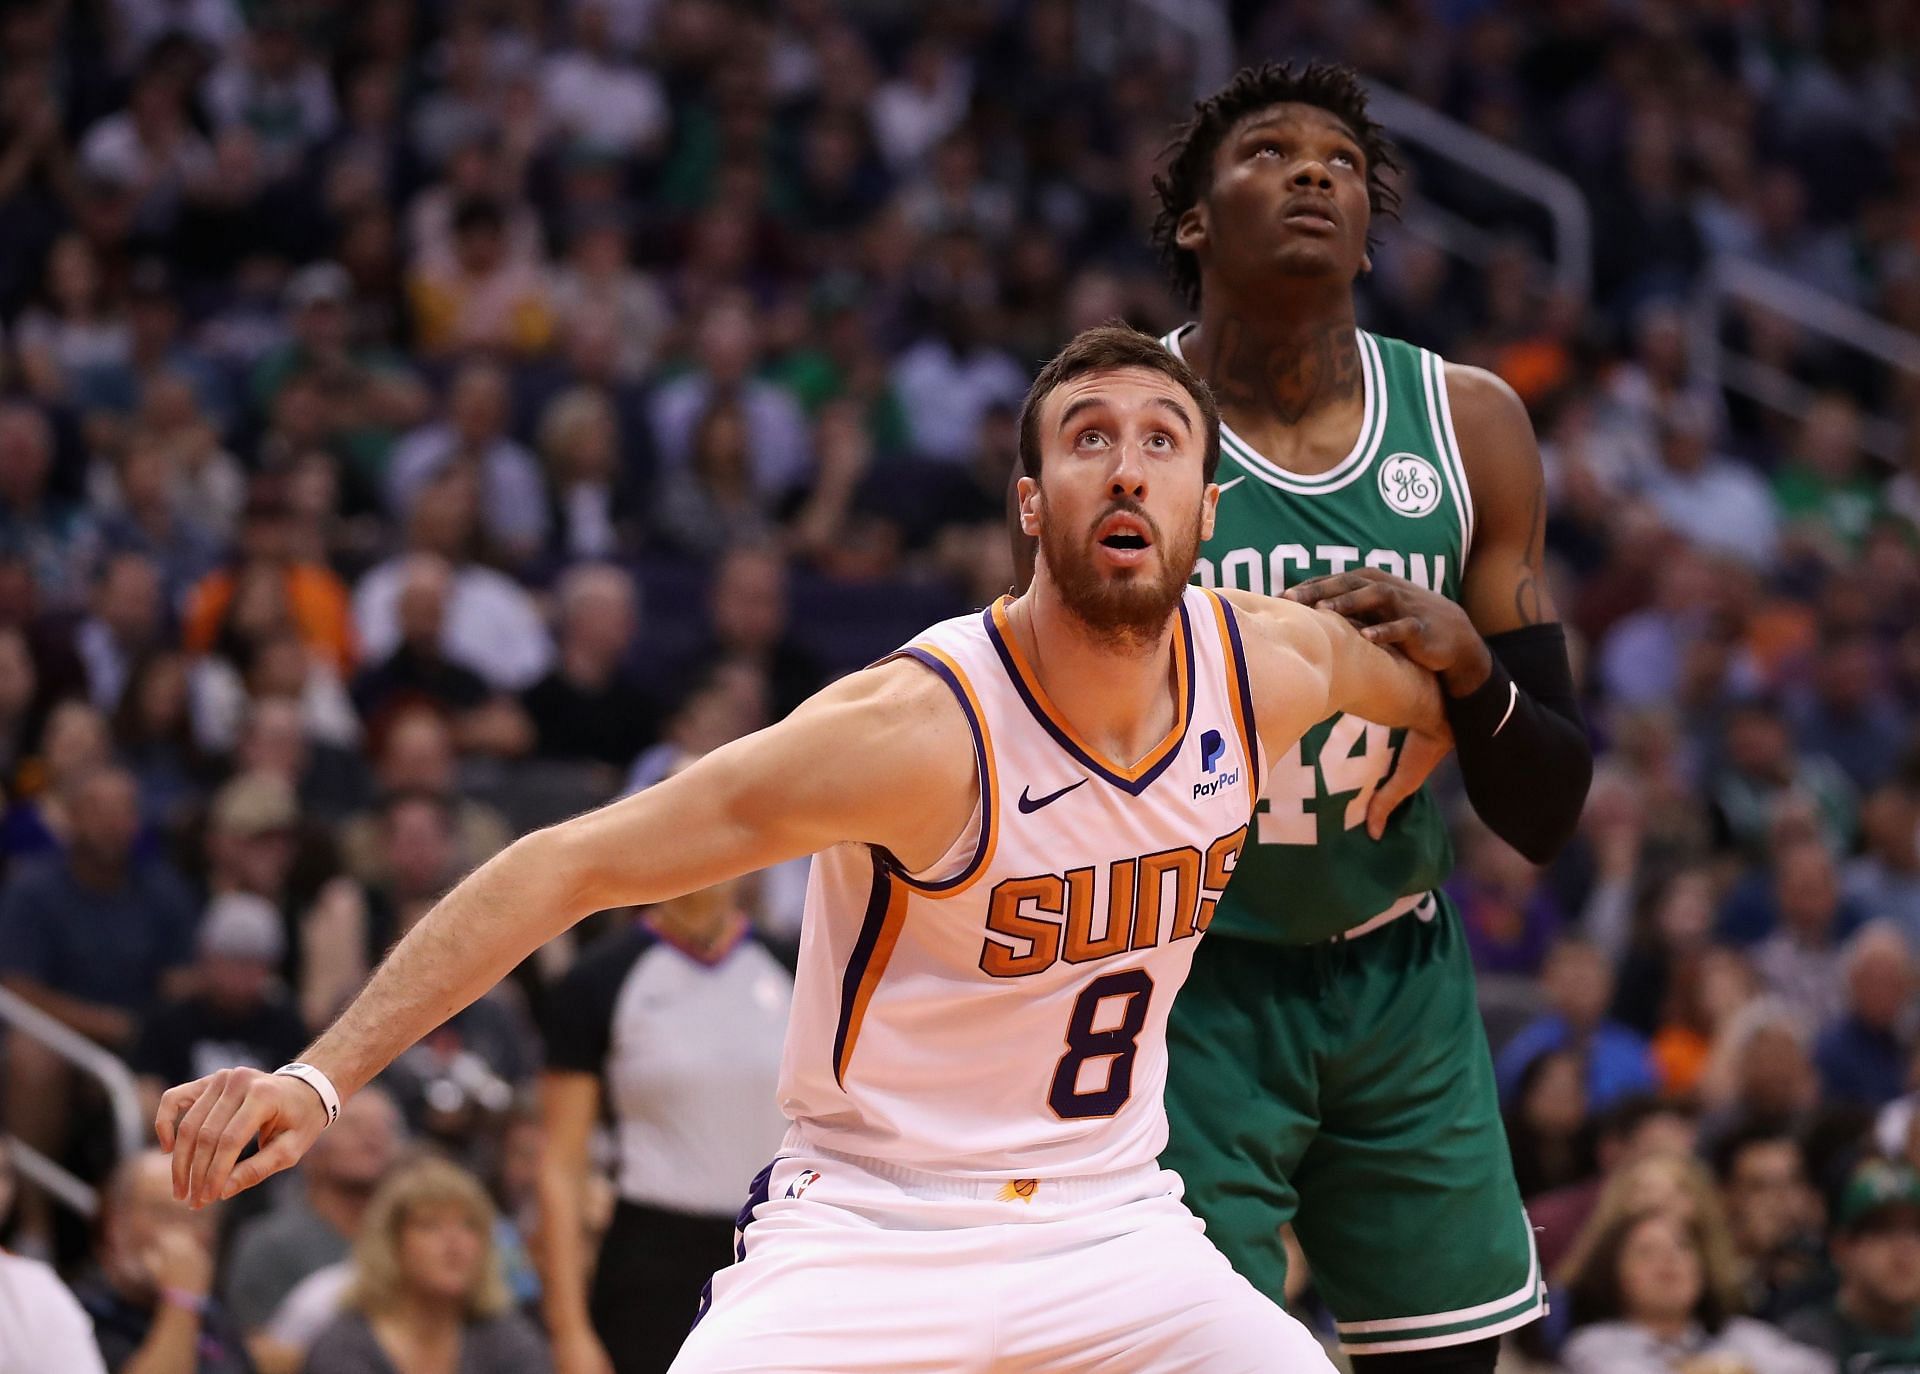 The Boston Celtics and the Phoenix Suns will face off at the Footprint Center on Friday